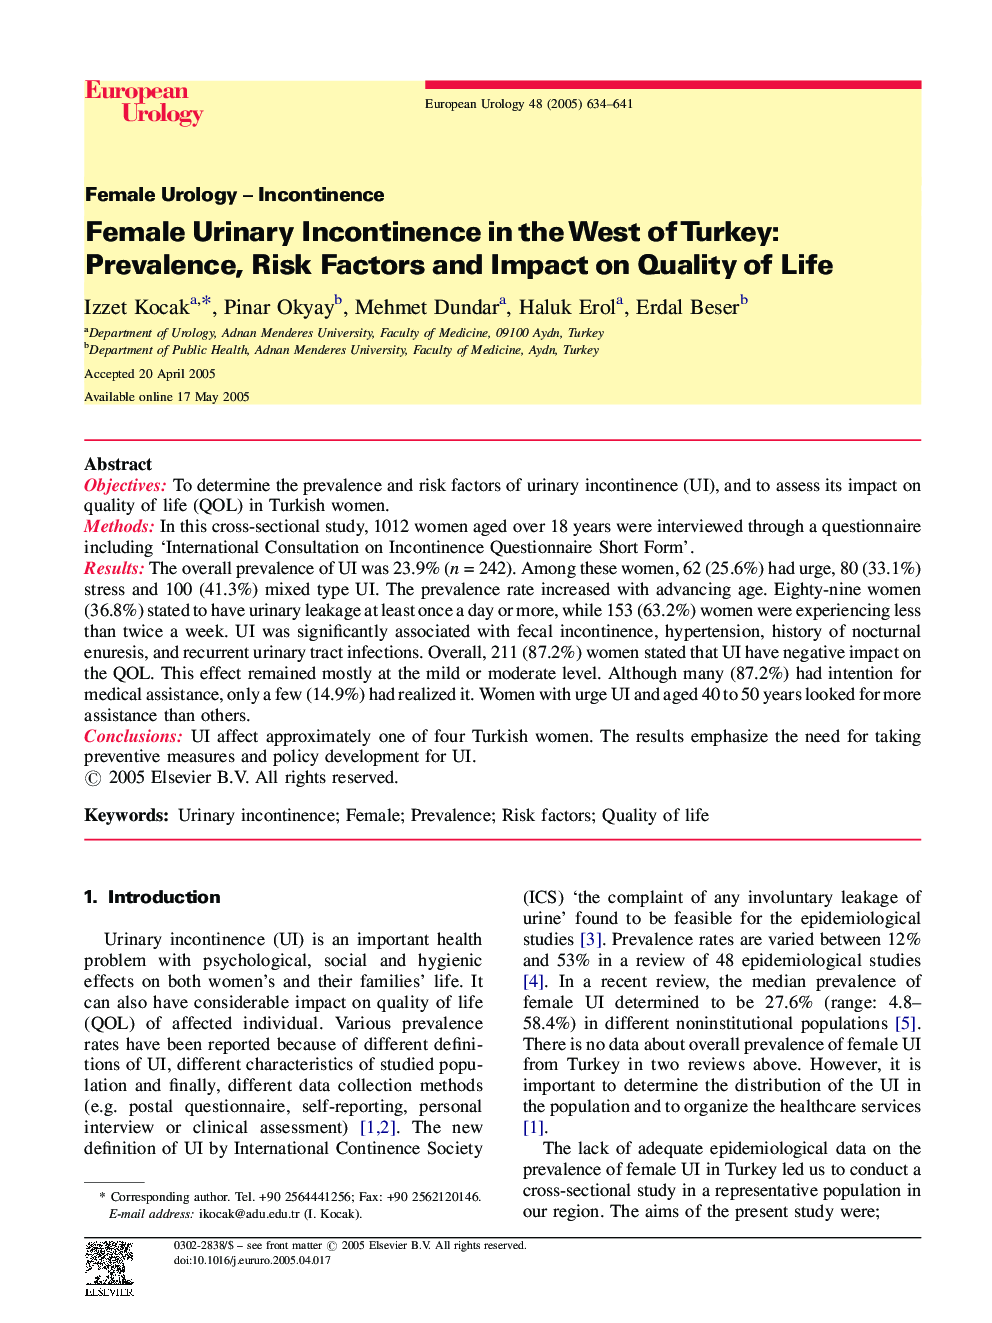 Female Urinary Incontinence in the West of Turkey: Prevalence, Risk Factors and Impact on Quality of Life